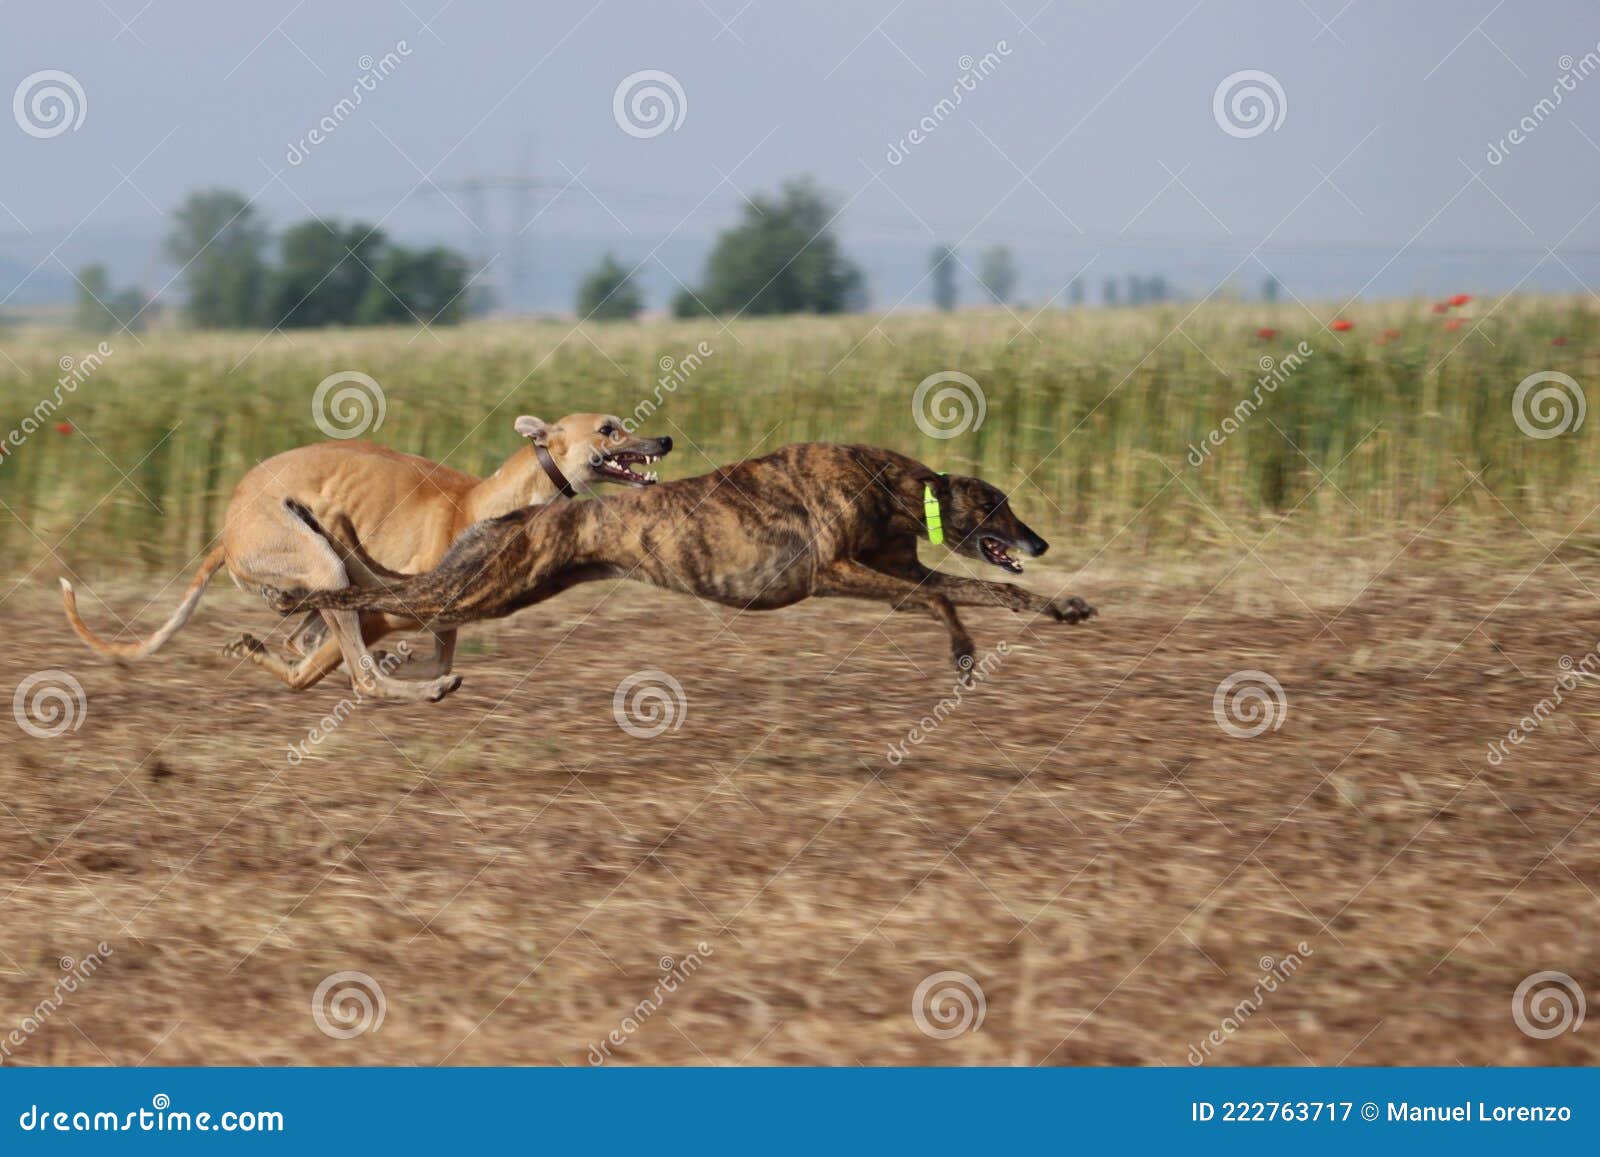 spanish greyhound dog race hare hunting speed delivers passion